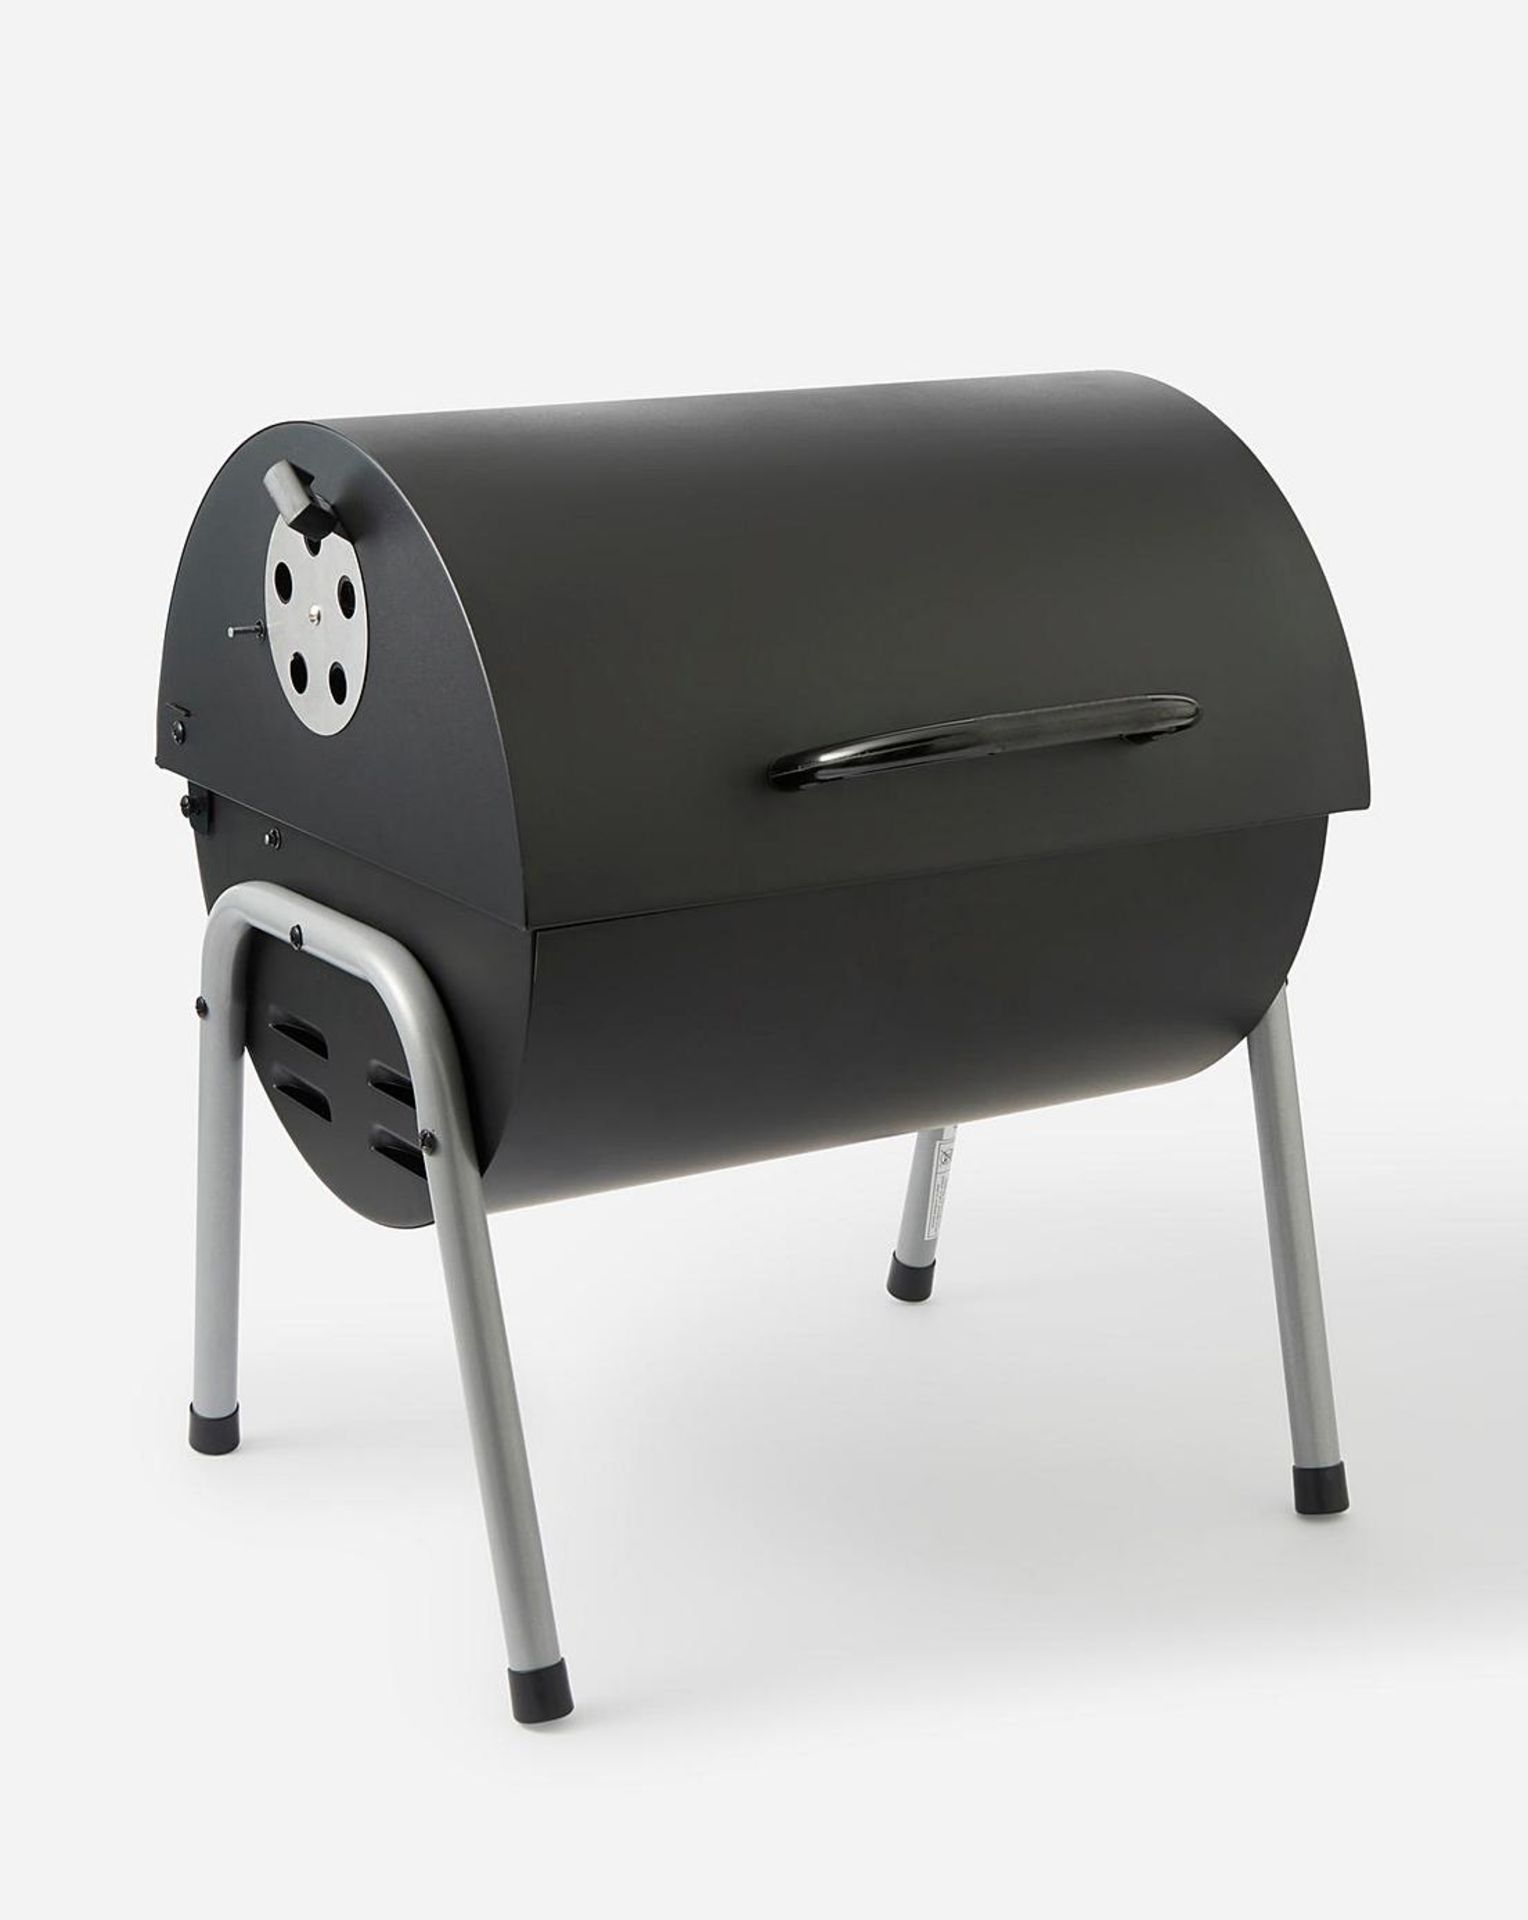 4x BRAND NEW Tabletop Oil Drum Barbeque Grill. RRP £59.99 EACH. Black steel firebowl with enamel - Image 2 of 3